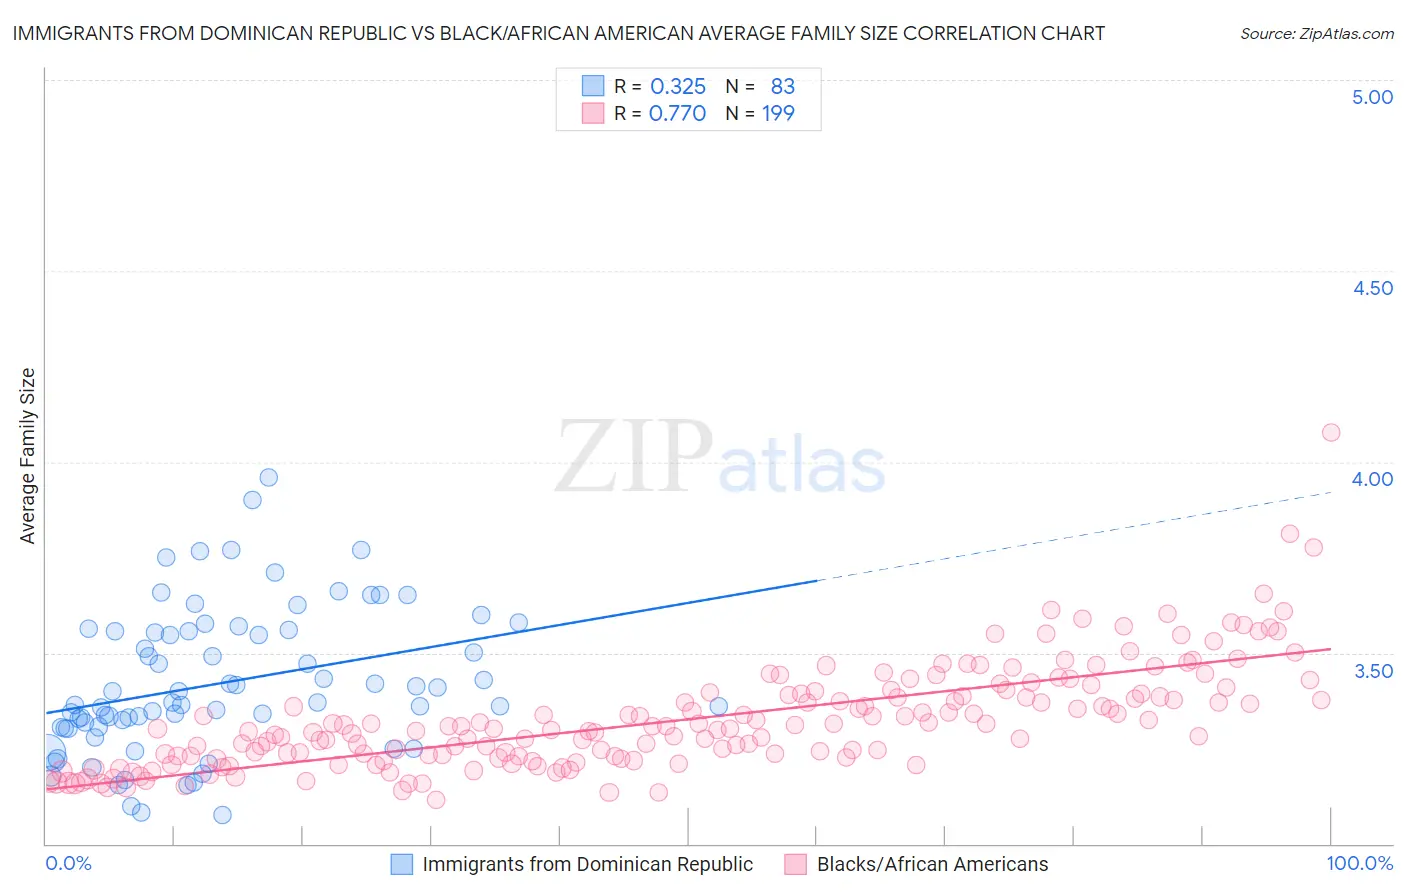 Immigrants from Dominican Republic vs Black/African American Average Family Size